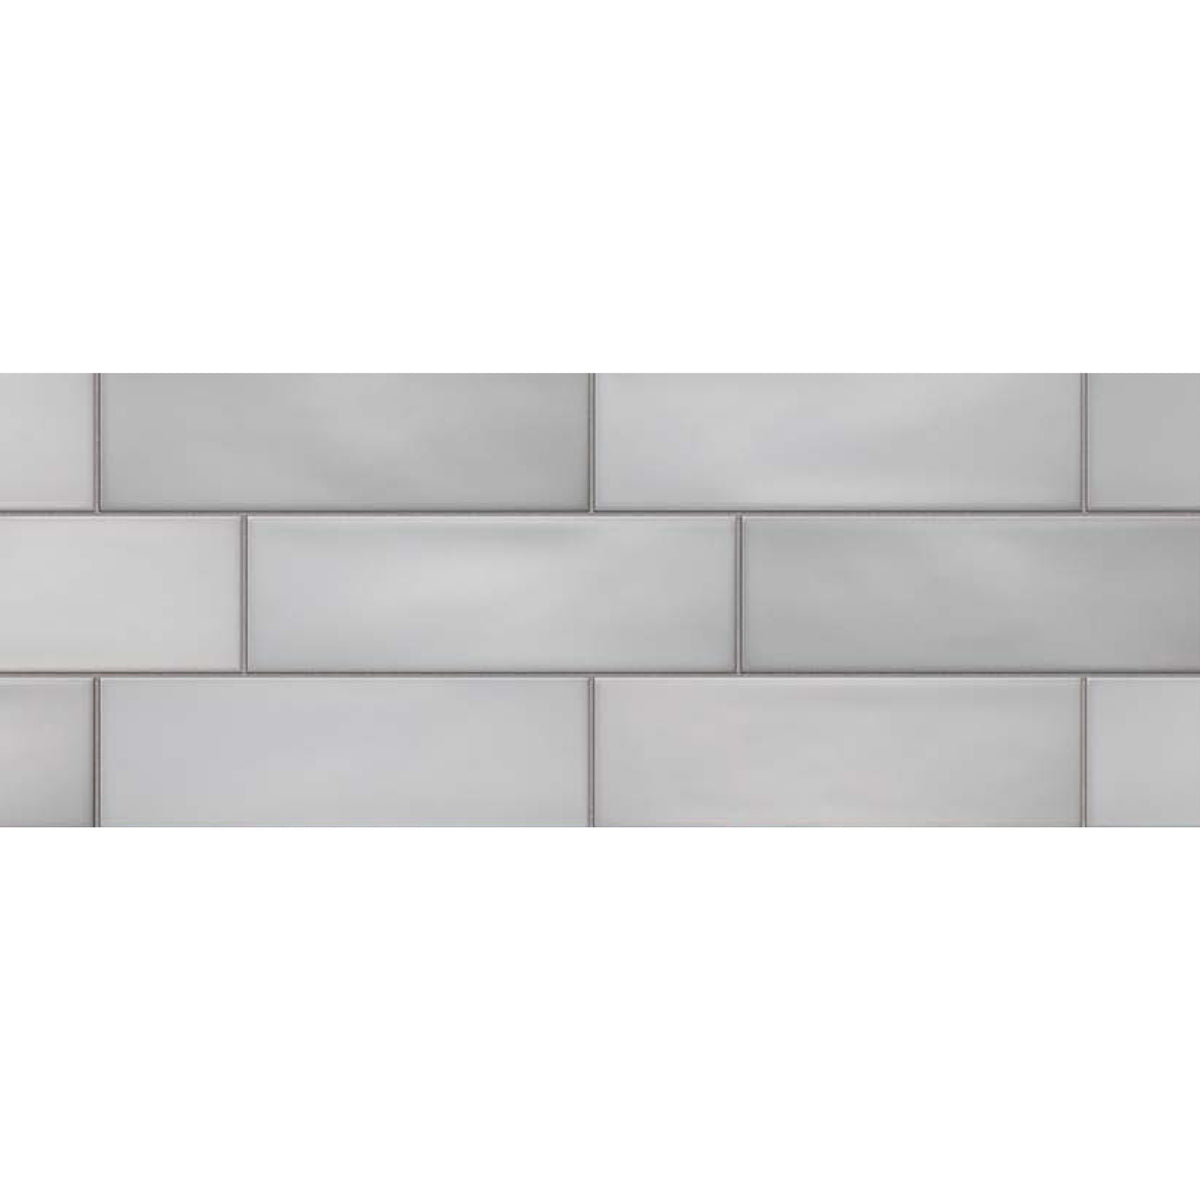 Topcu - Chalky - 2.5 in. x 8 in. Ceramic Wall Tile - Sky Installed